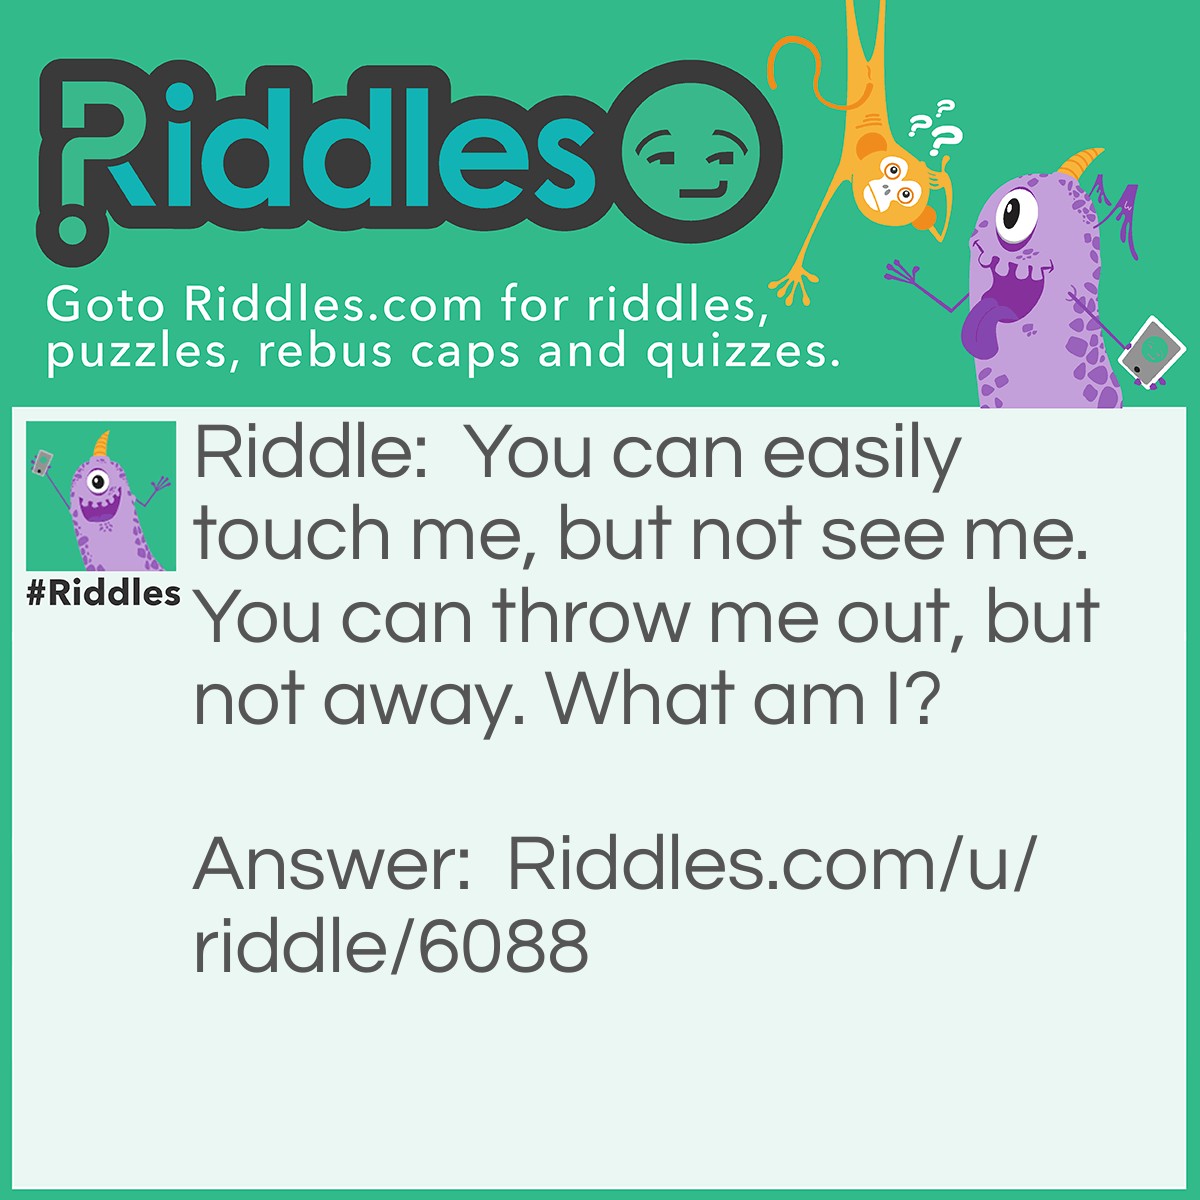 Riddle: You can easily touch me, but not see me. You can throw me out, but not away. What am I? Answer: Your back.